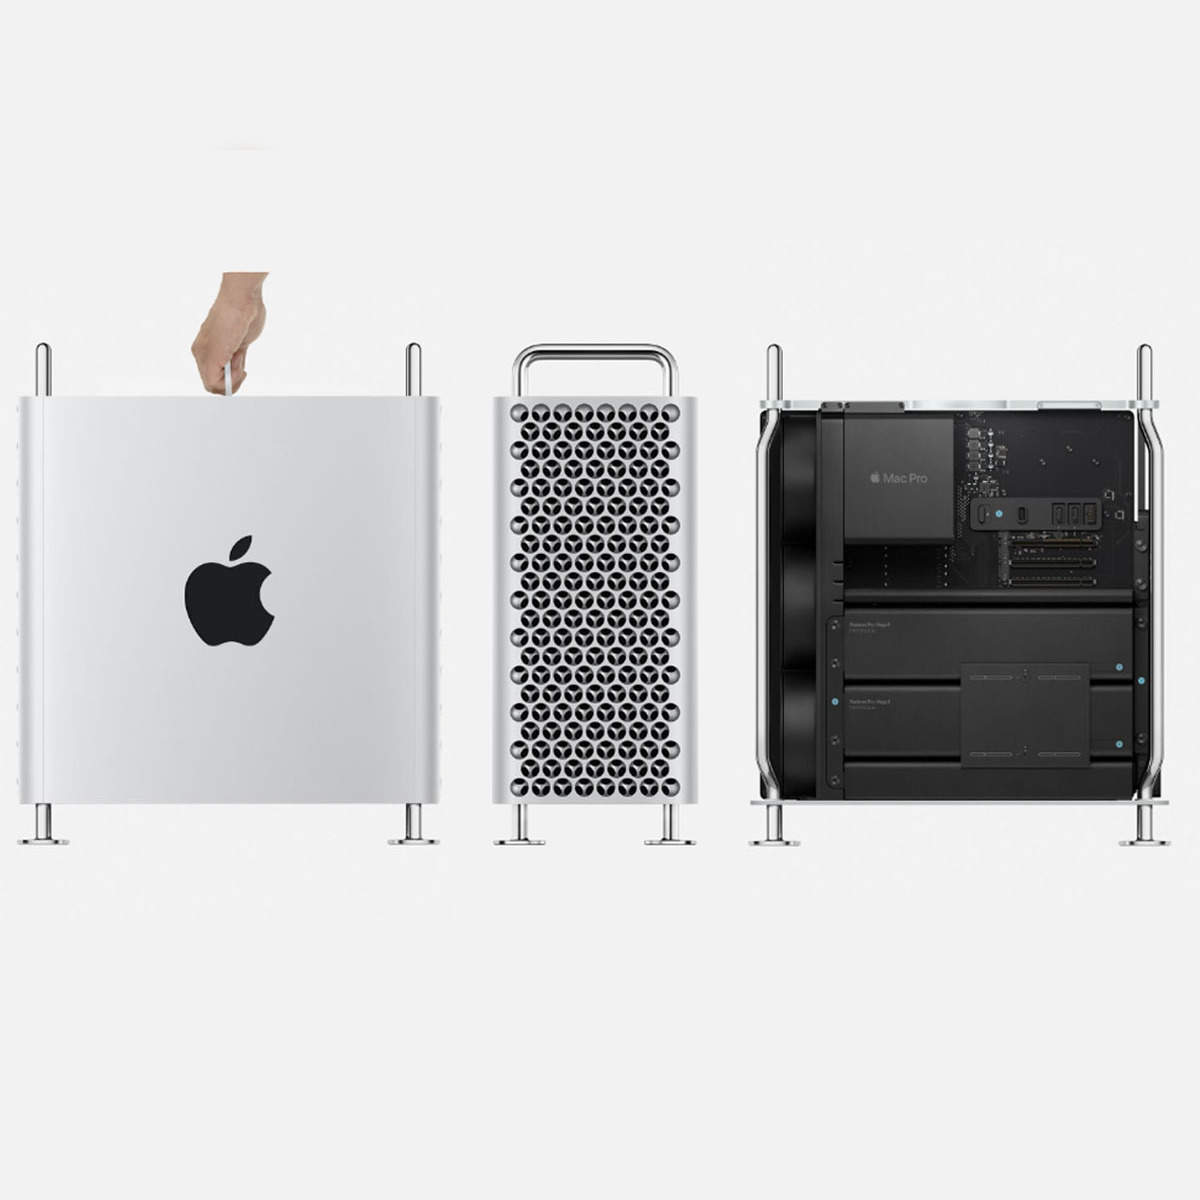 Apple New Mac Pro Desktop Costs $52,000. Without $400 Wheels - Bloomberg